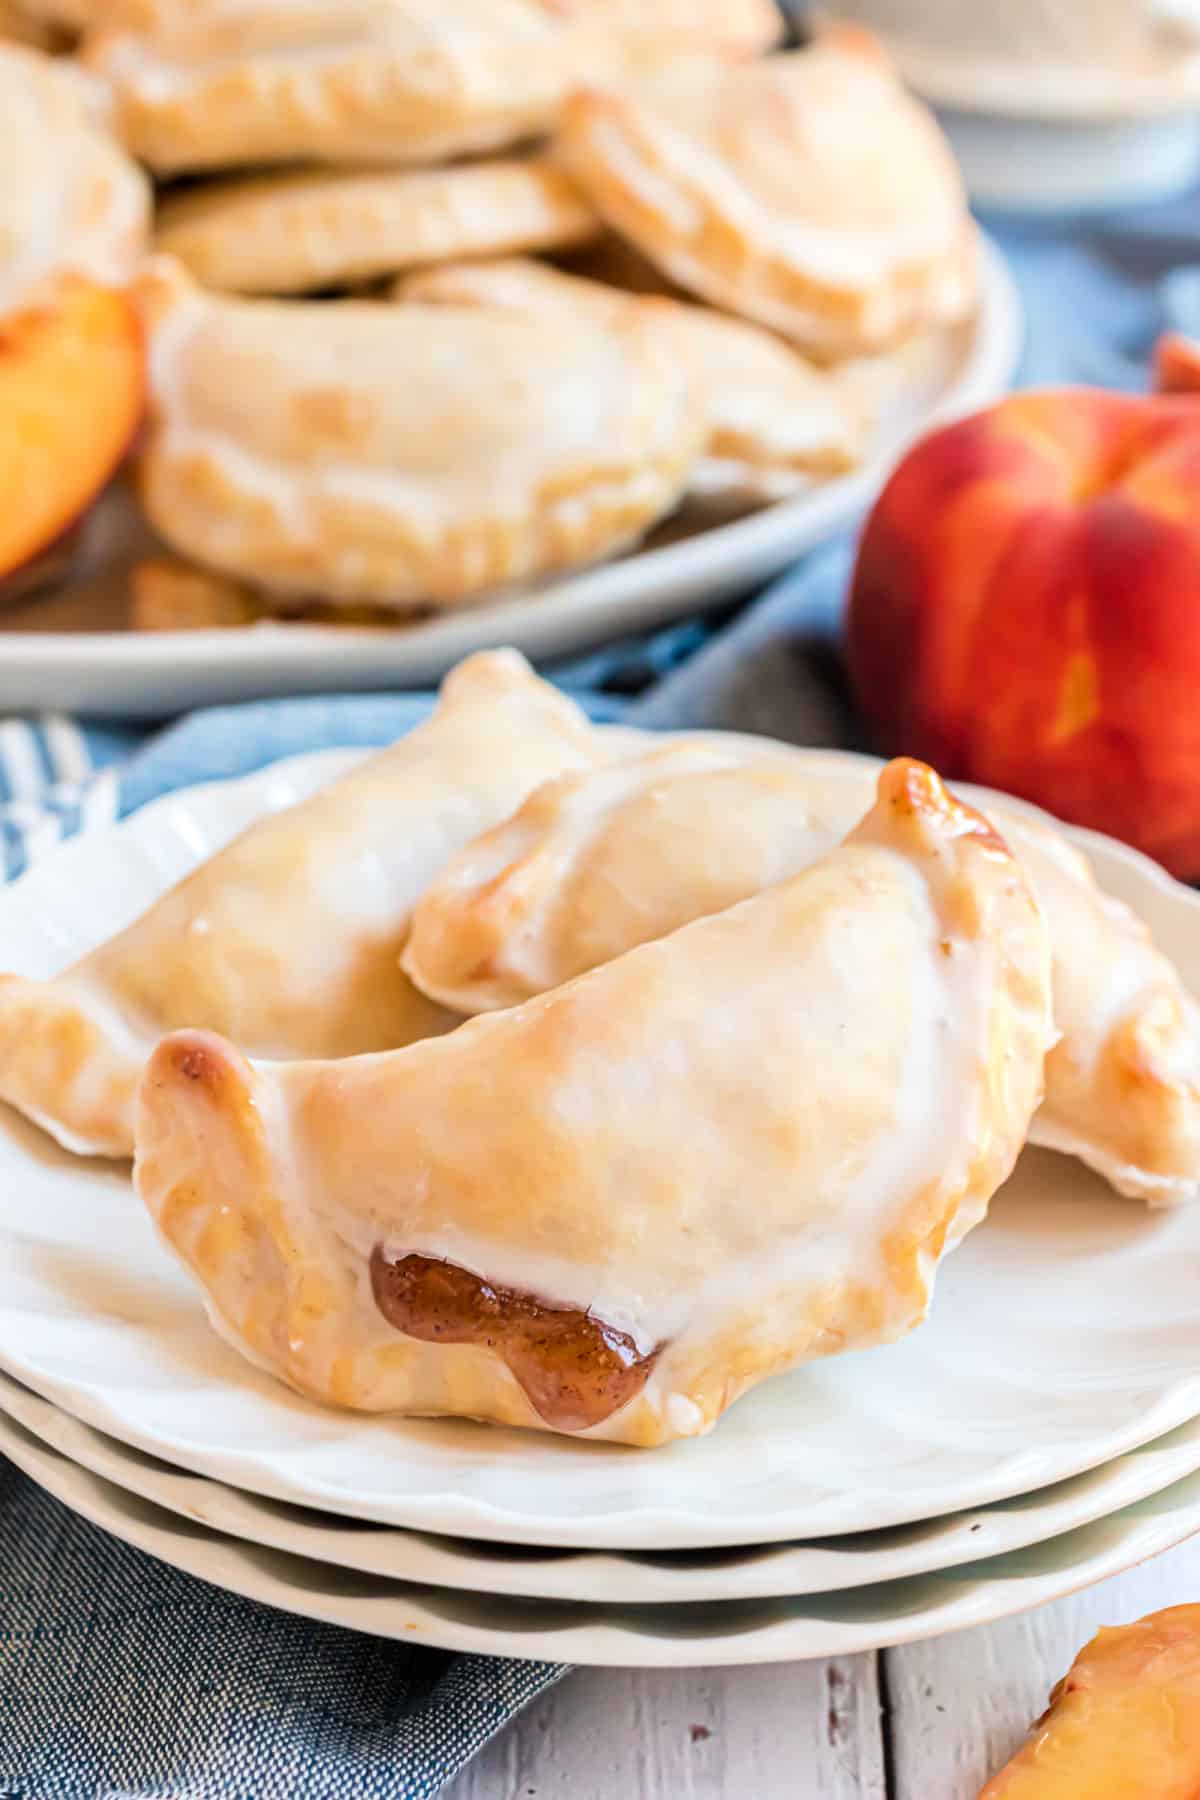 Peach hand pies served on a stack of white ruffled plates.